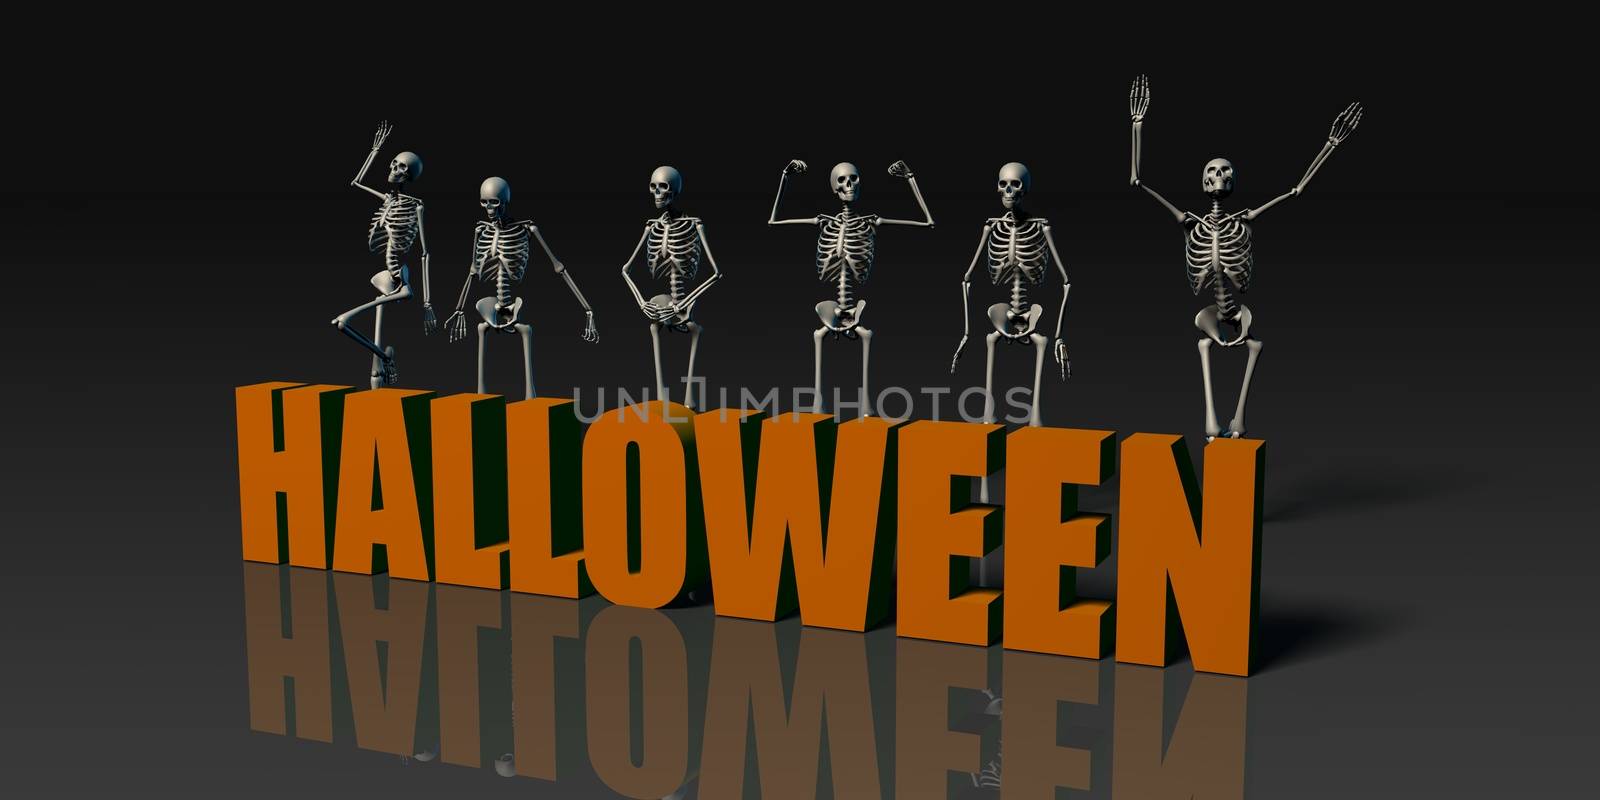 Halloween Postcard with Skeleton Group Crowd Moving as Concept